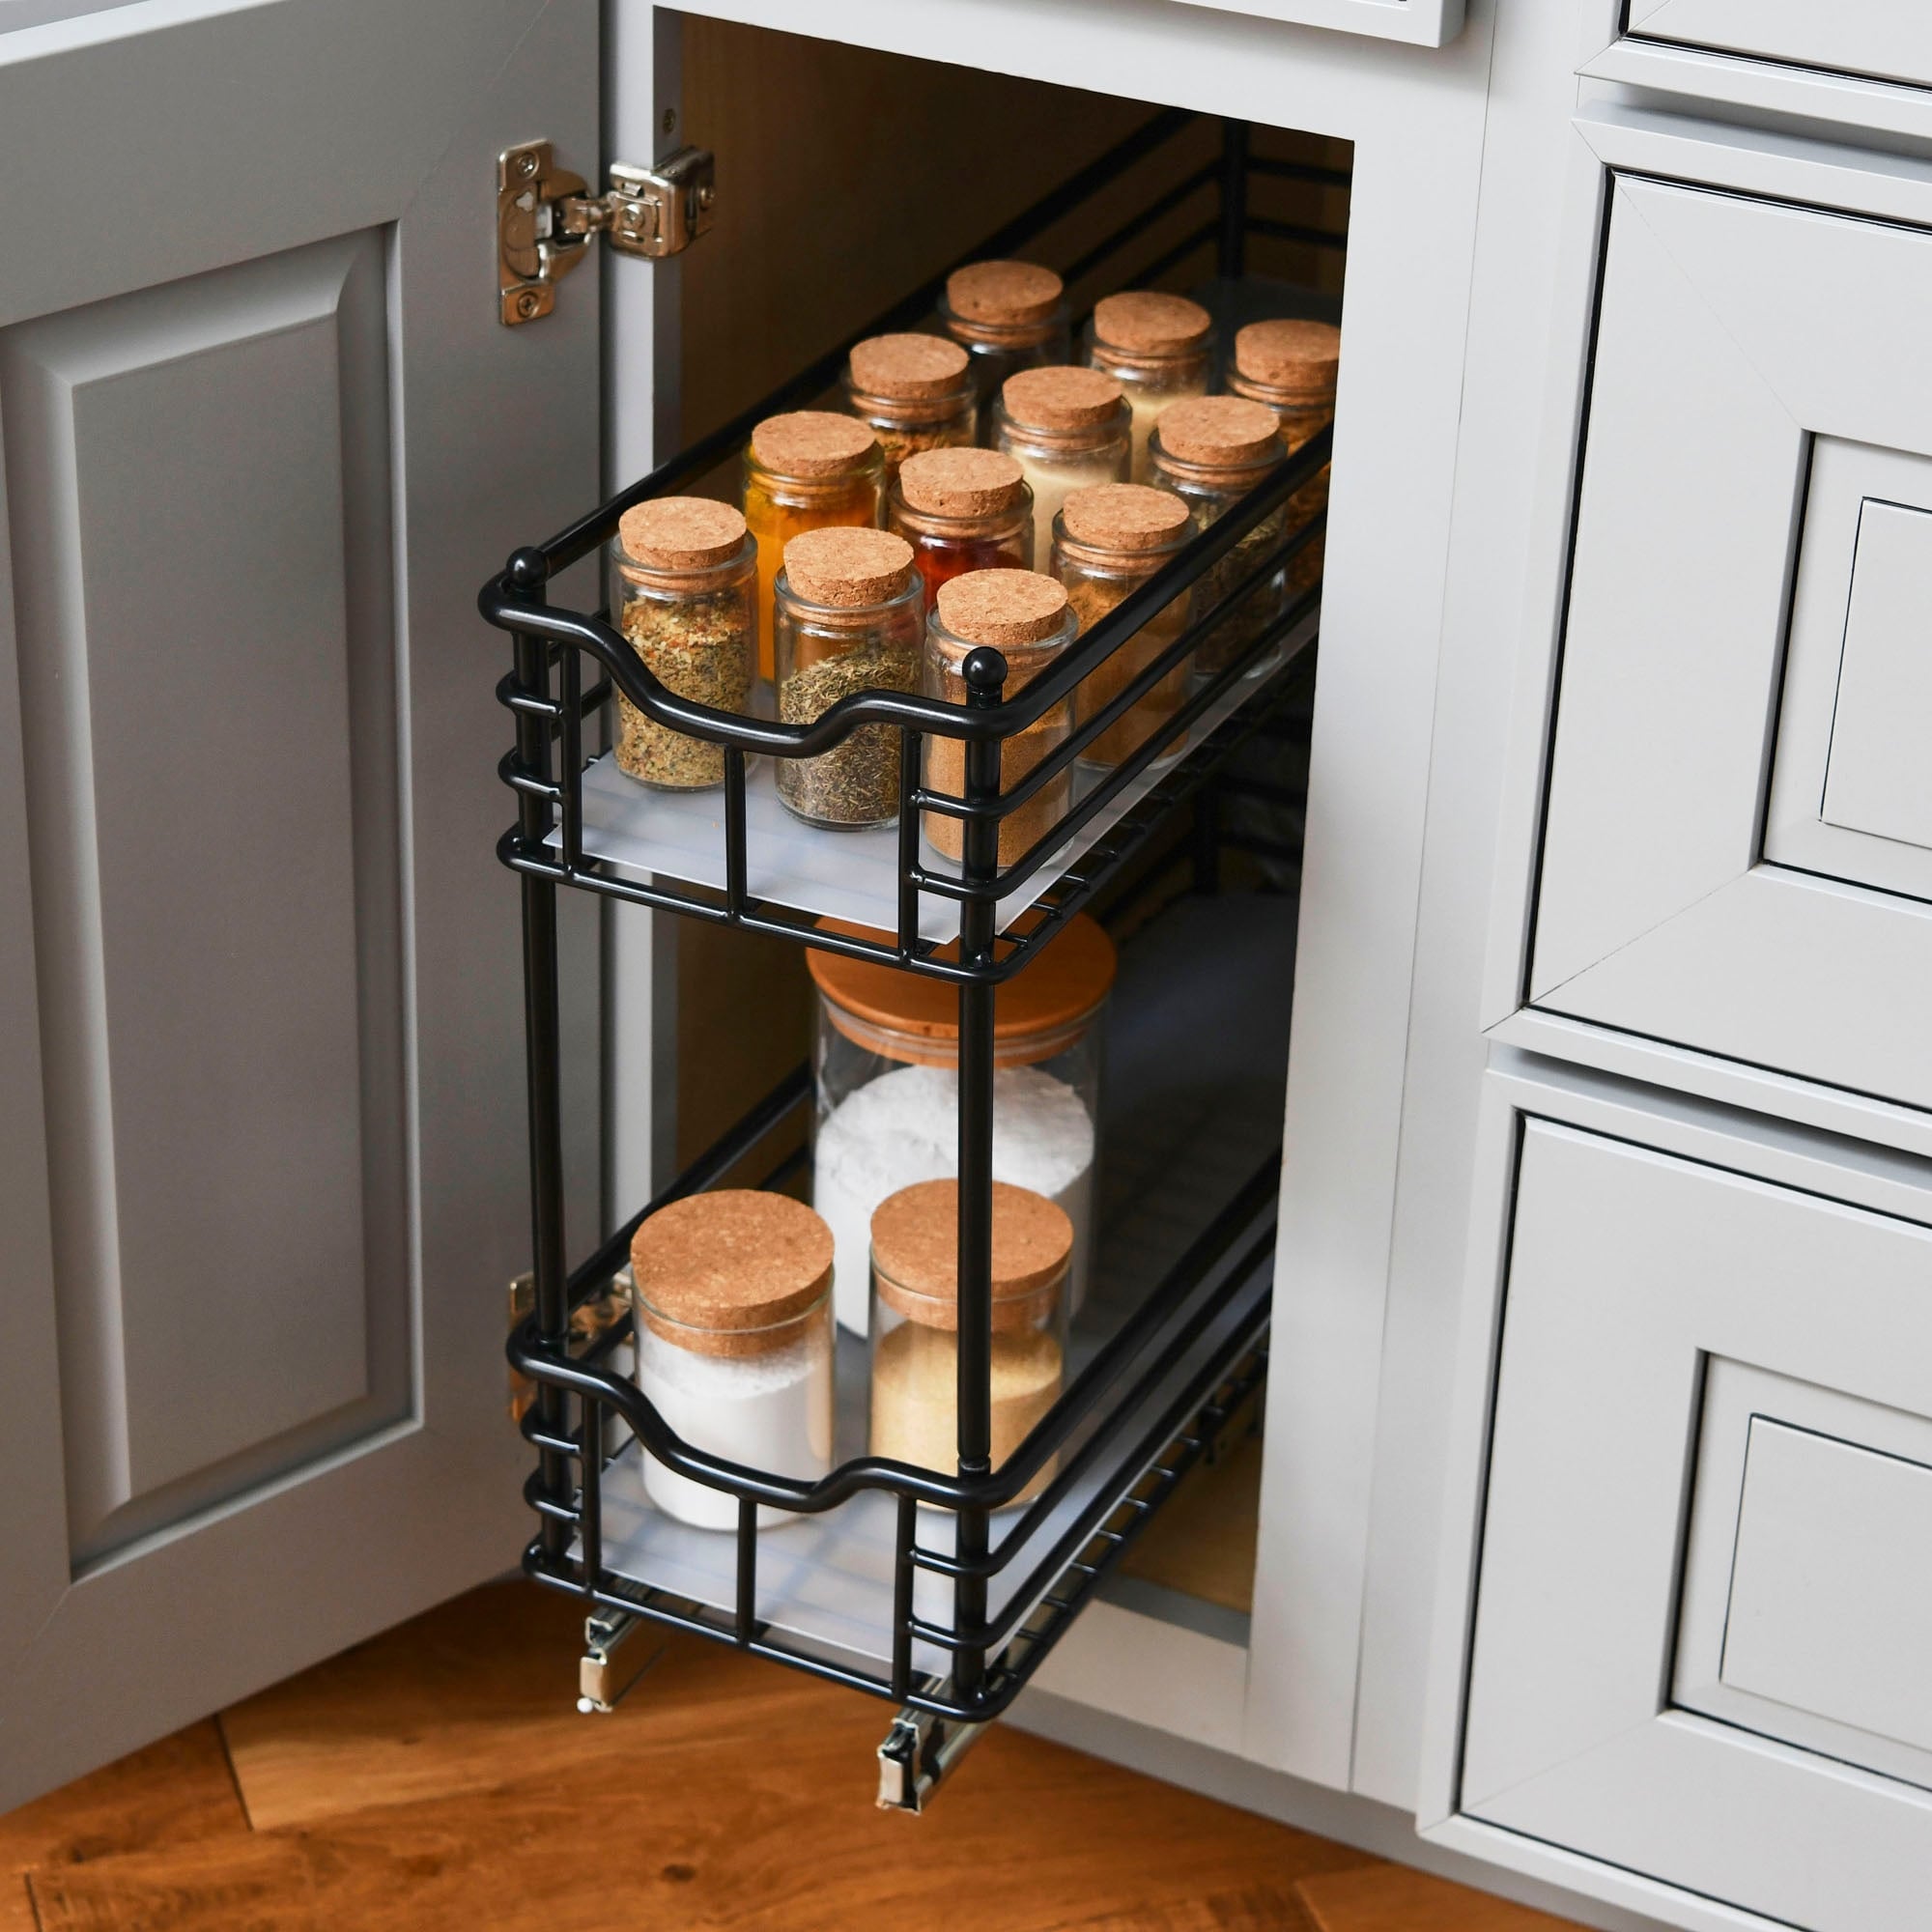 https://ak1.ostkcdn.com/images/products/is/images/direct/272e739b5bf53d7c10d418cda96af4a6190c9a6e/Glidez-Pull-Out-Slide-Out-Storage-Organizer-with-Plastic-Liners---2-Tier-Design.jpg